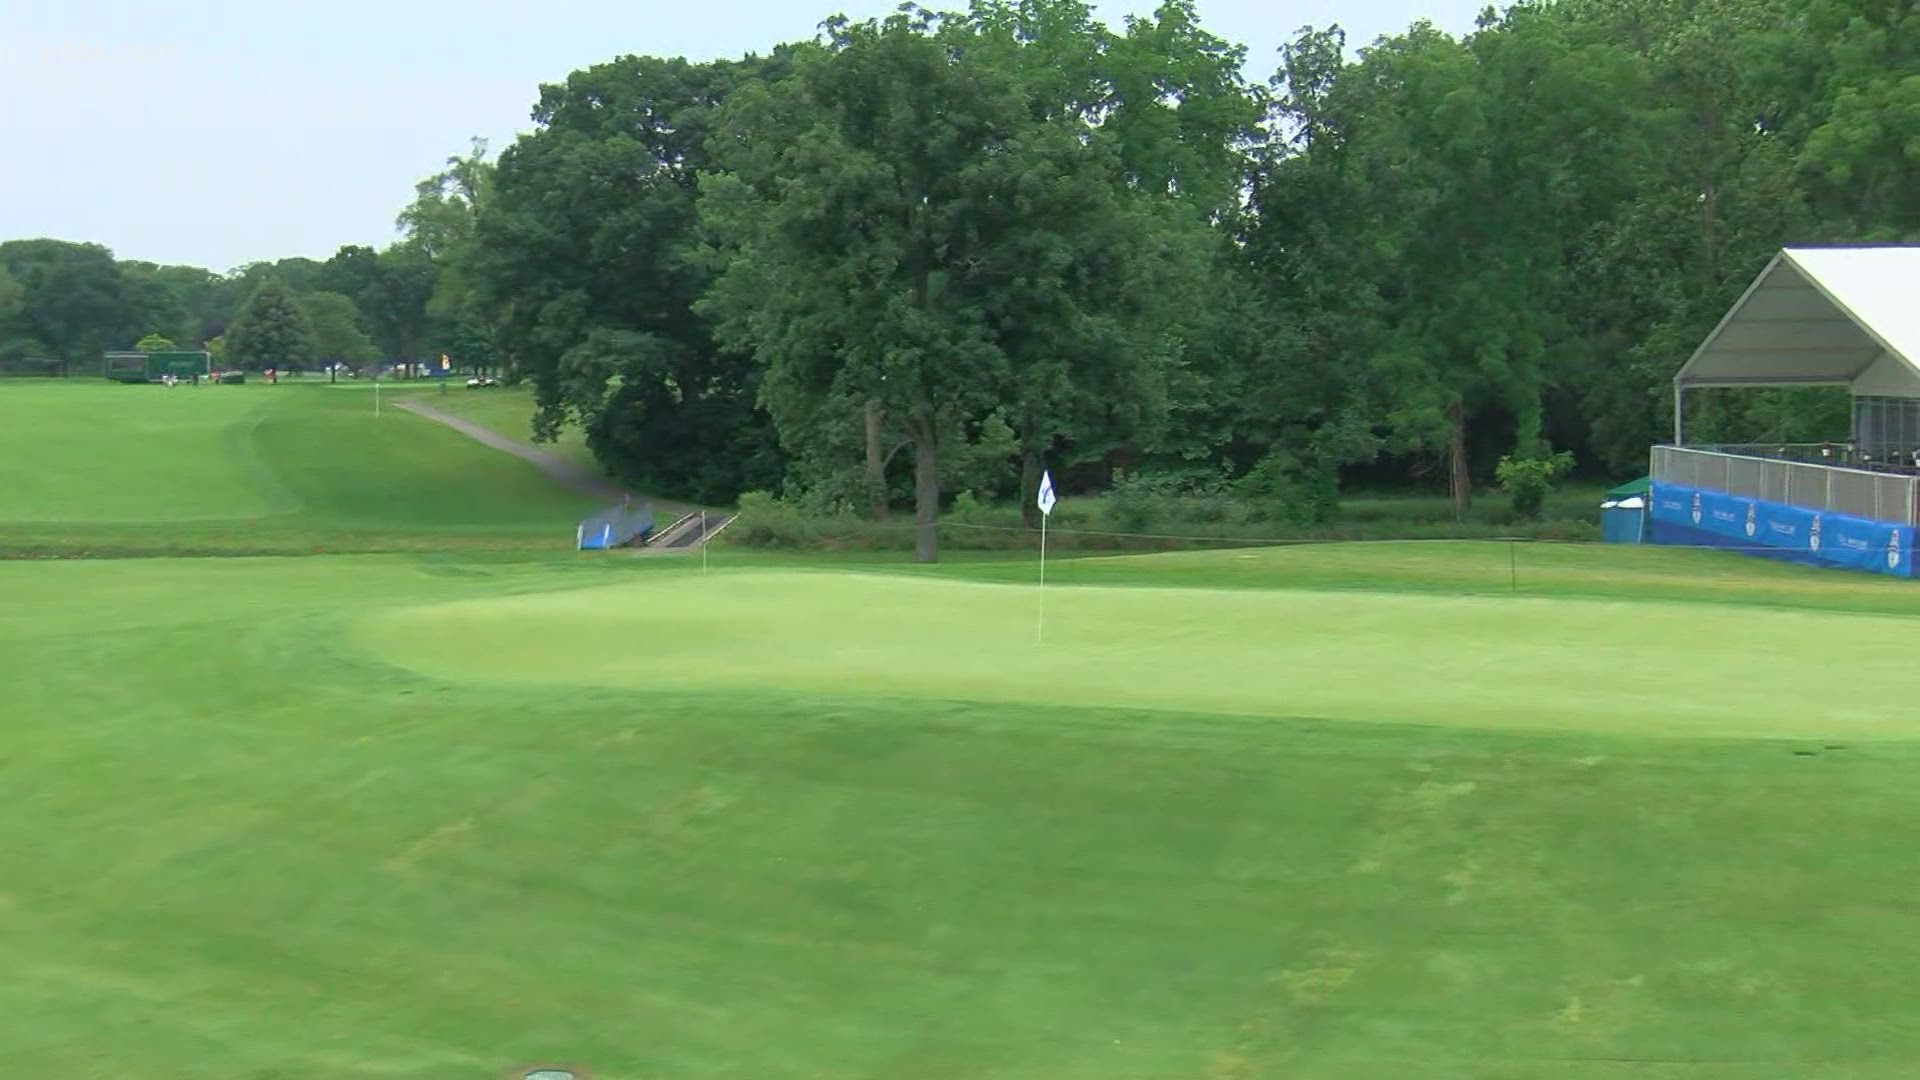 The best golfers in the LPGA will soon be teeing off at Highland Meadows in Sylvania. Get caught up on what to expect ahead of the 2021 Marathon LPGA Classic.